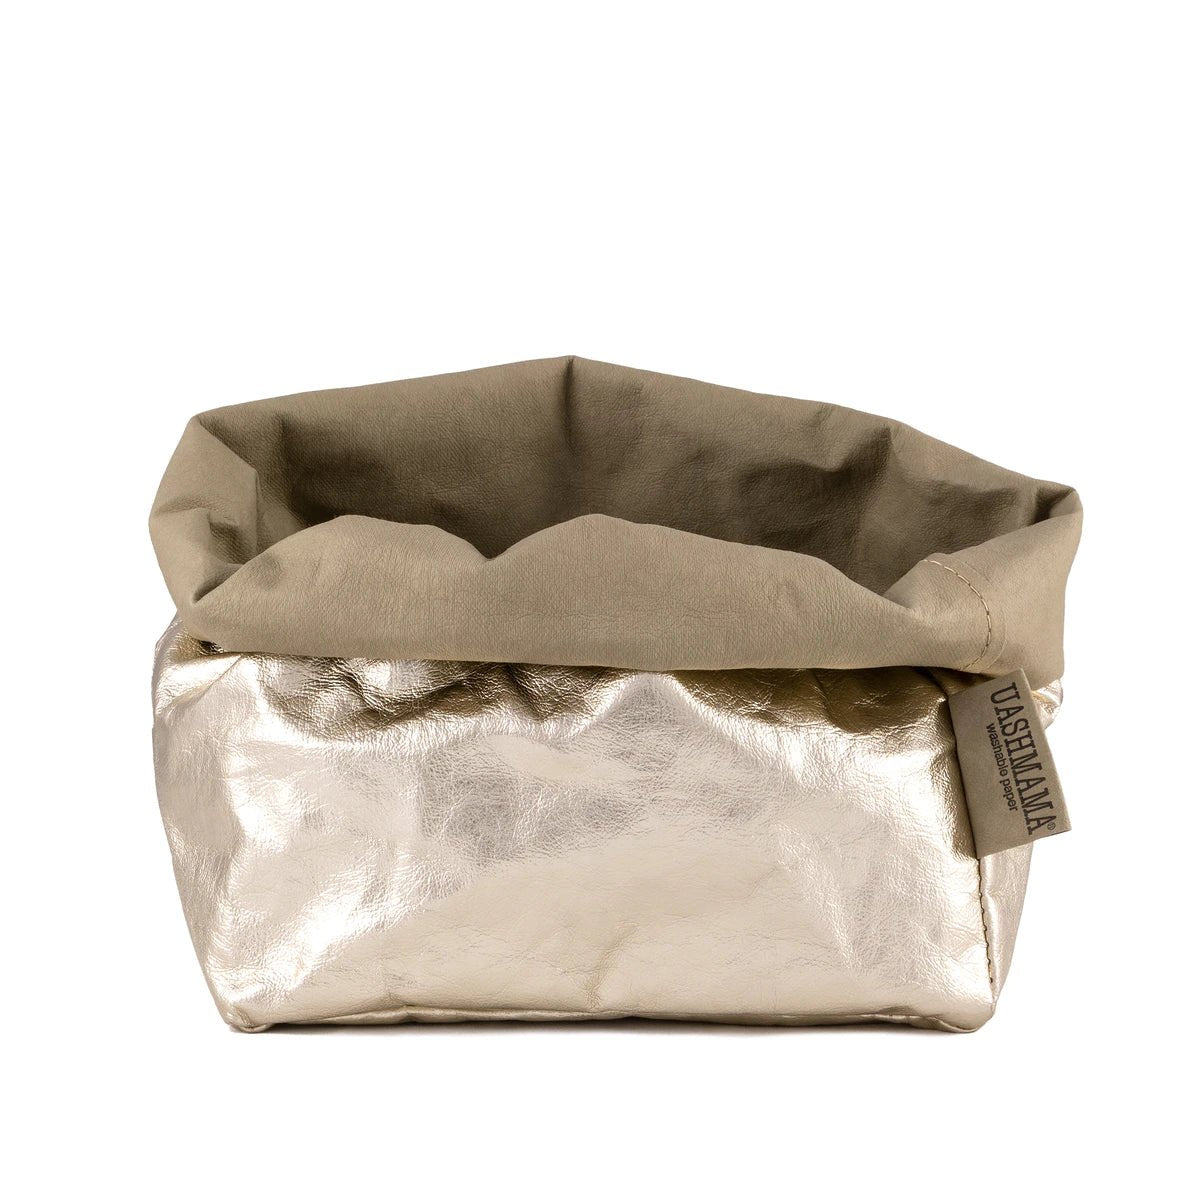 A washable paper bag is shown. The bag is rolled down at the top and features a UASHMAMA logo label on the bottom left corner. The bag pictured is the large size in metallic platinum.